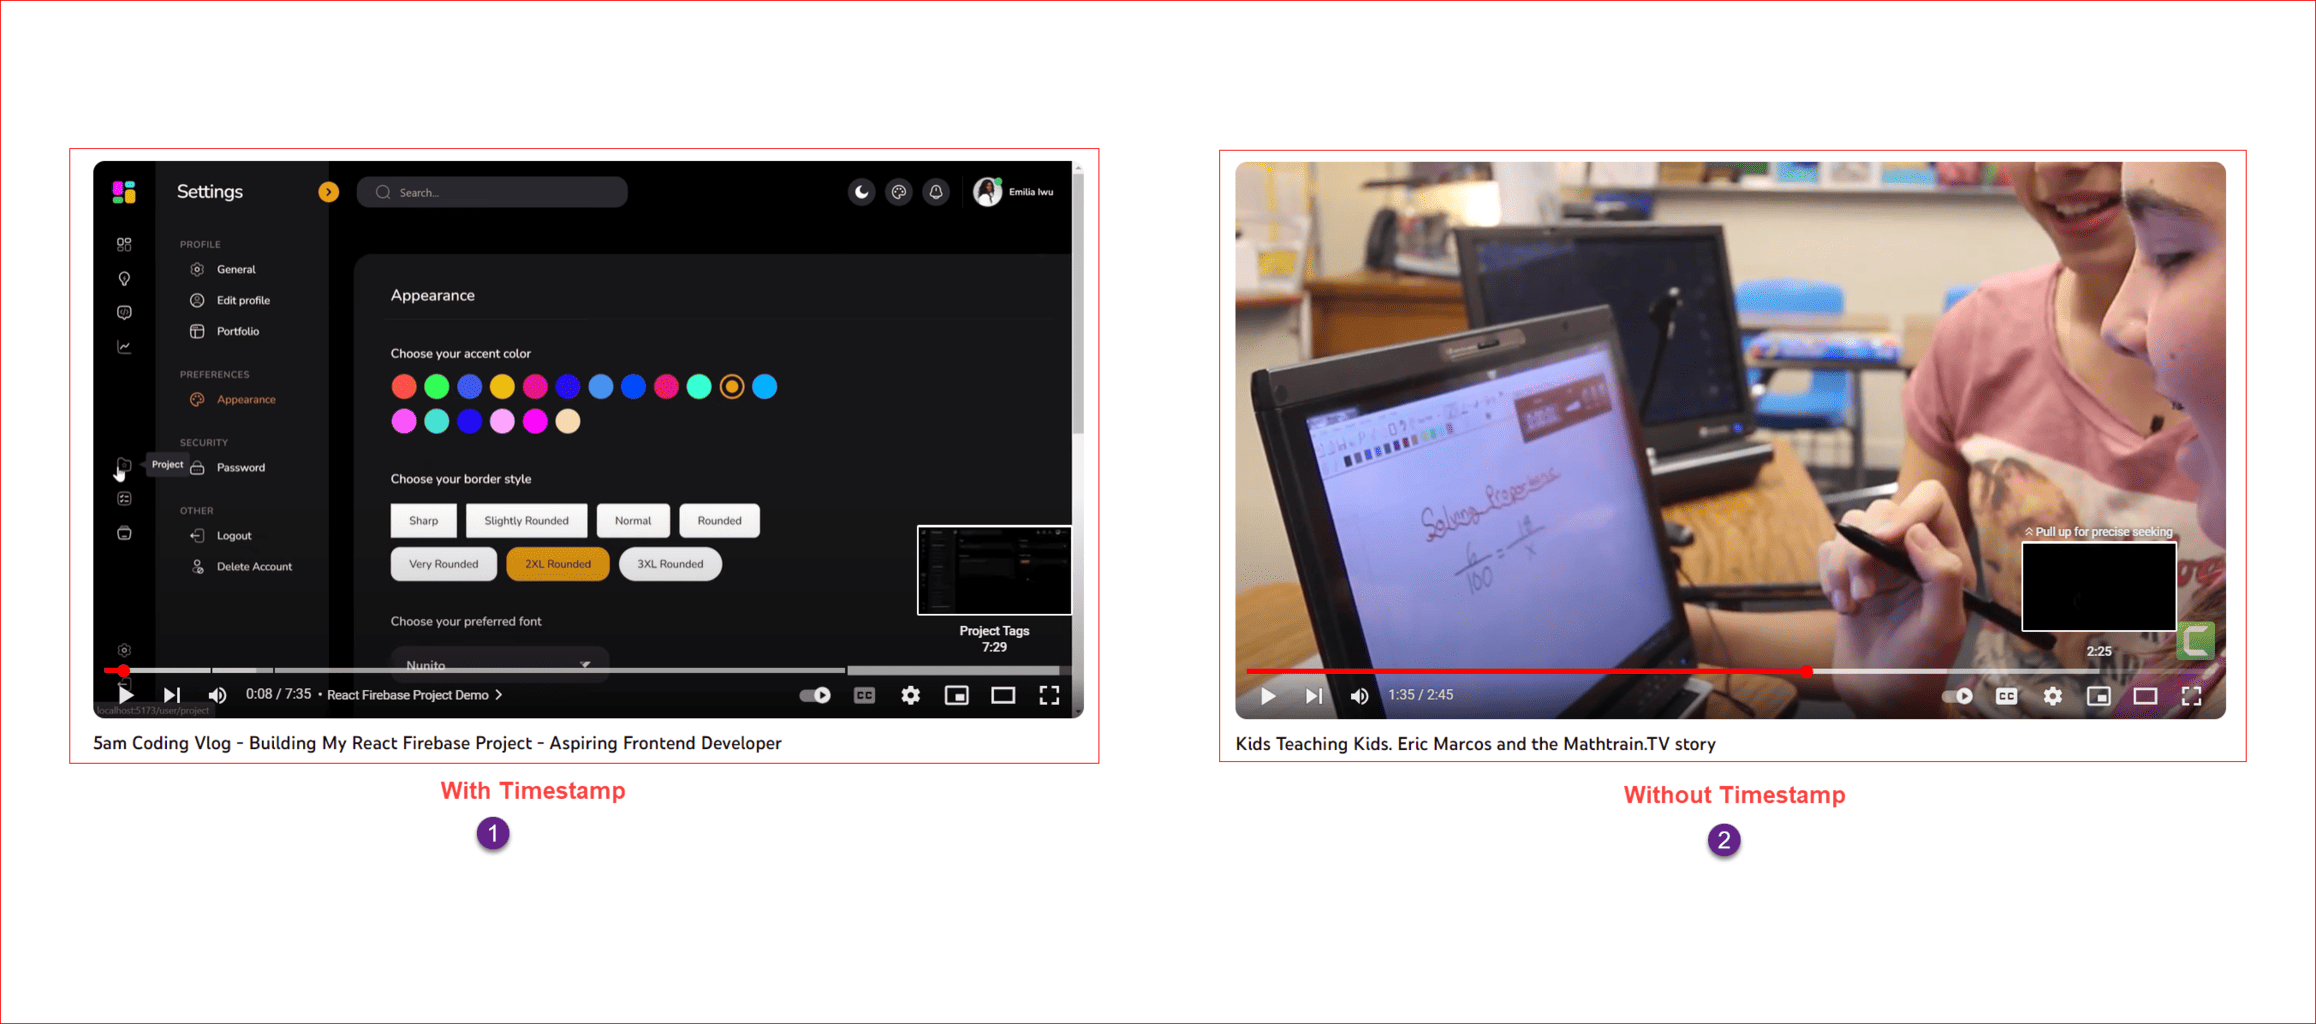 With and Without YouTube Timestamp